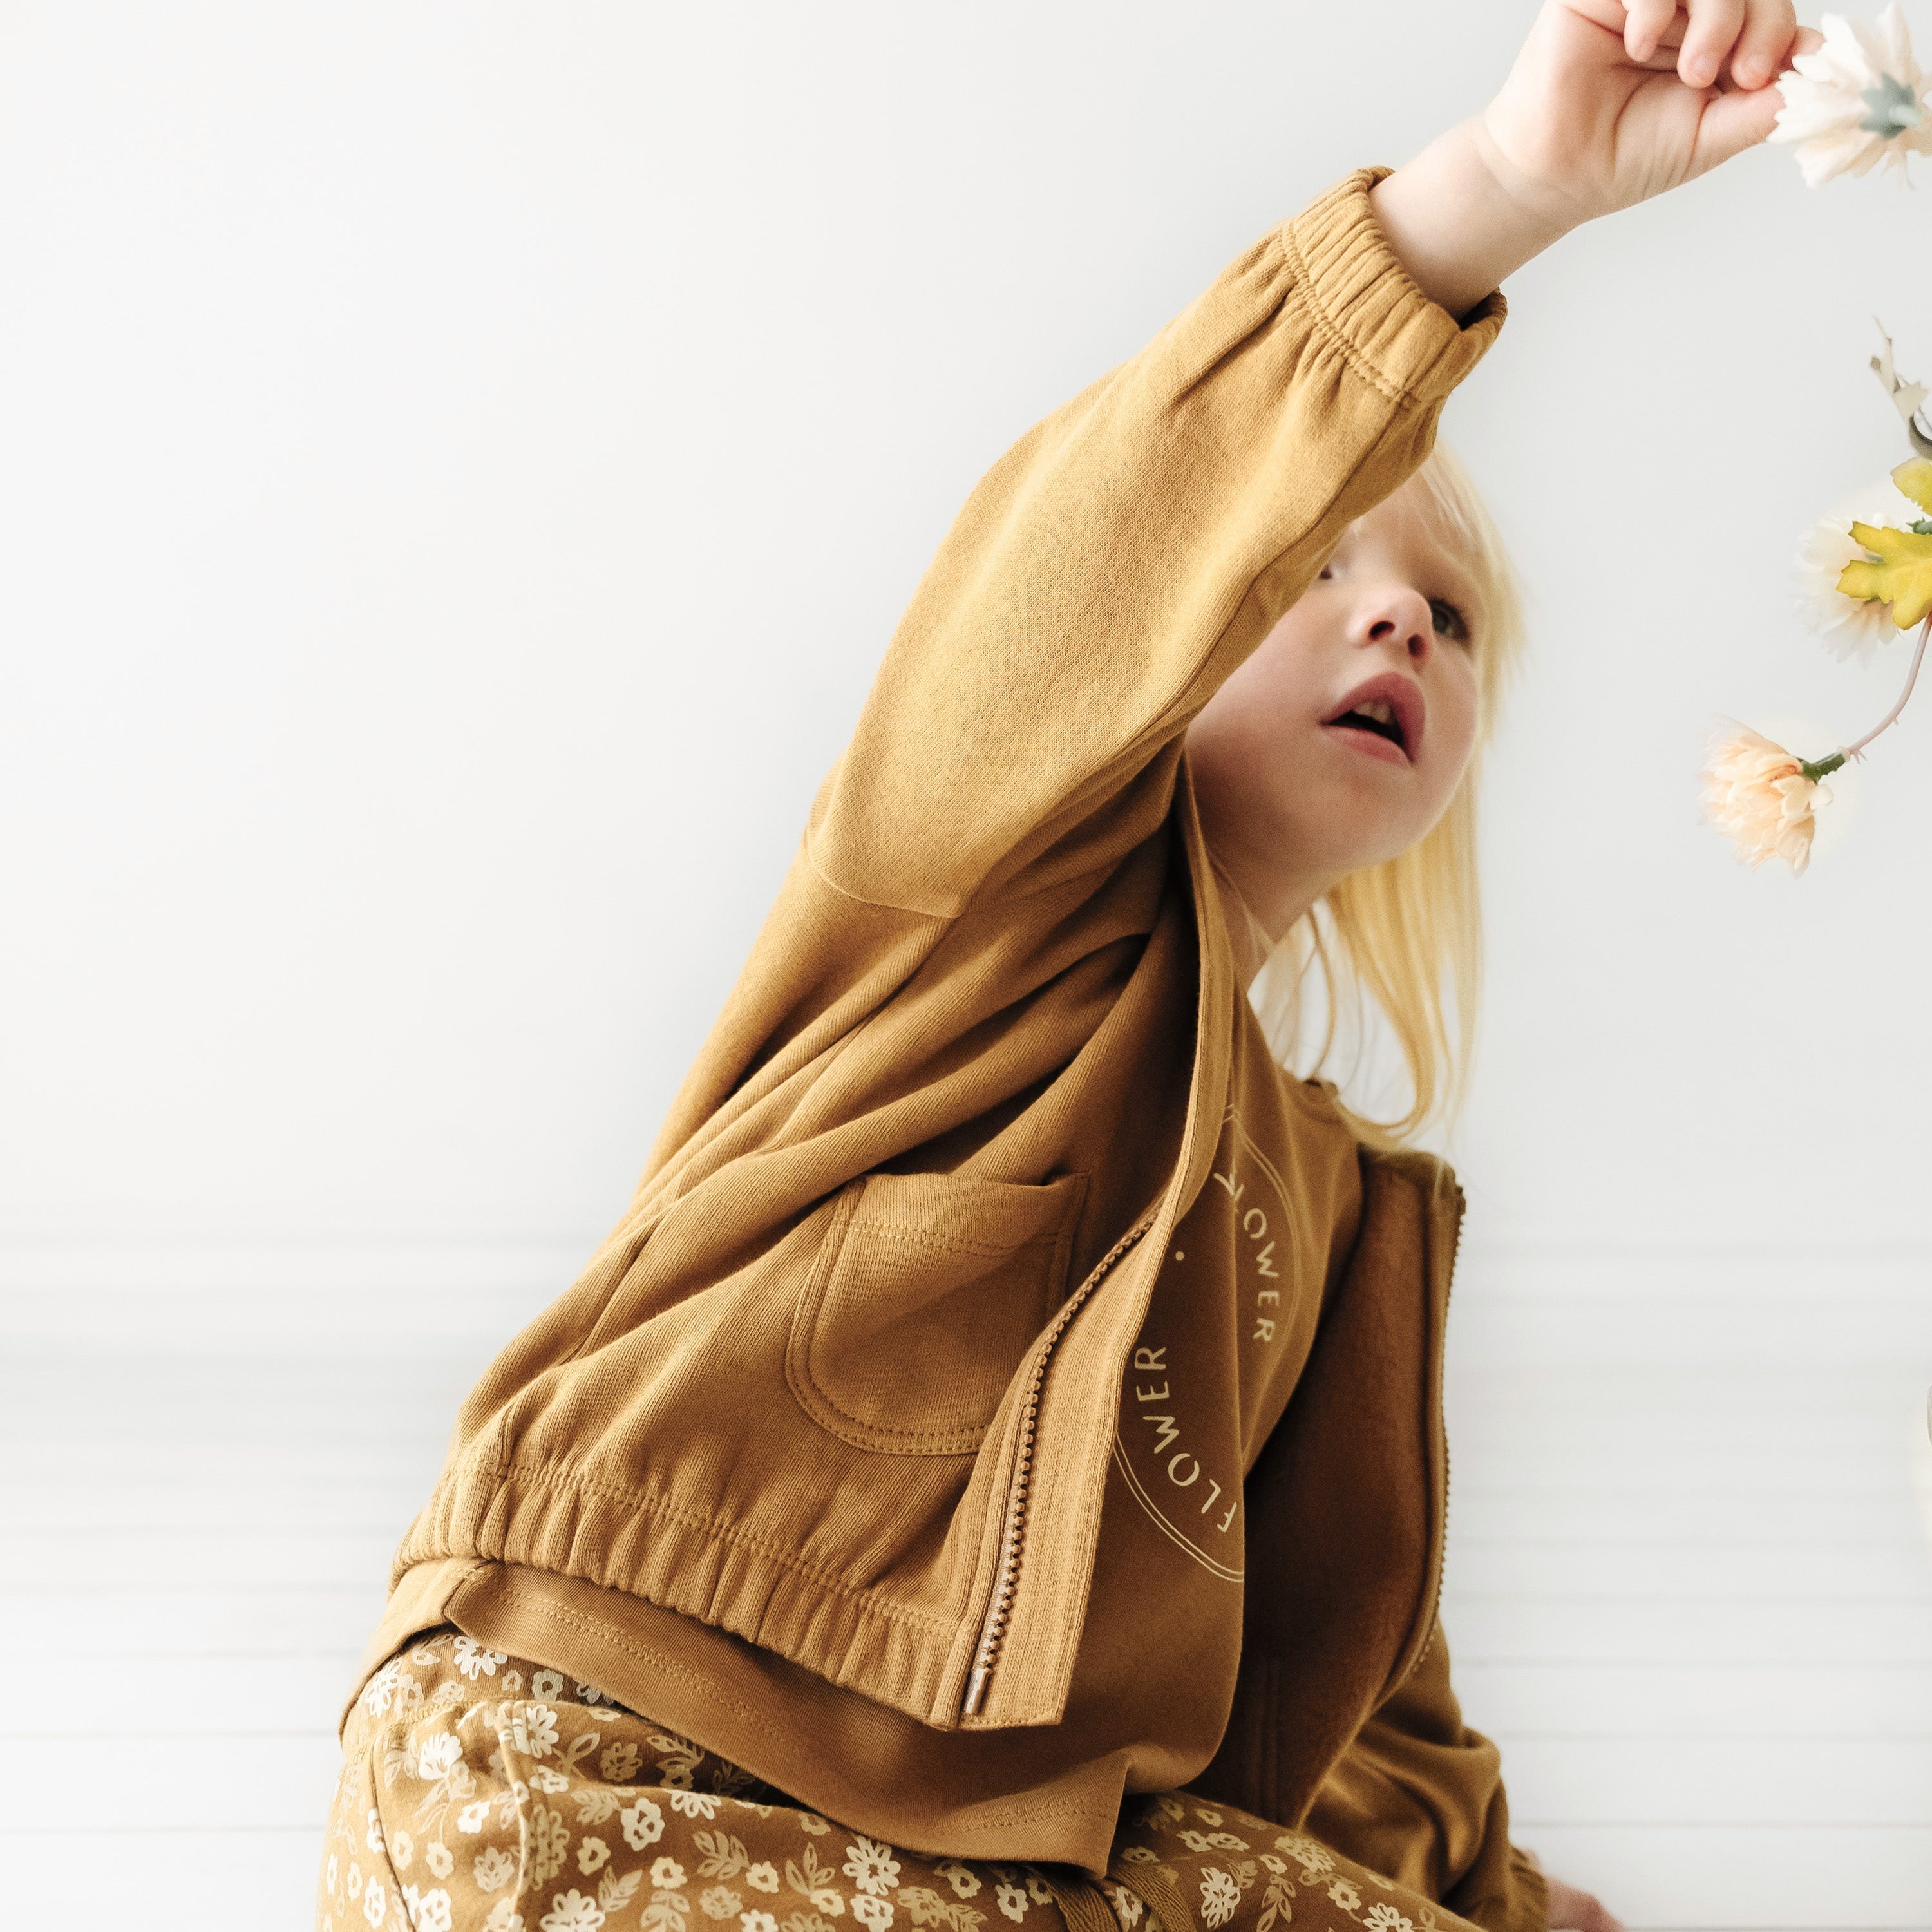 A young child with blonde hair reaching up to touch hanging flowers, wearing an Organic Baby tan Organic Hooded Jacket and patterned pants, against a white background.